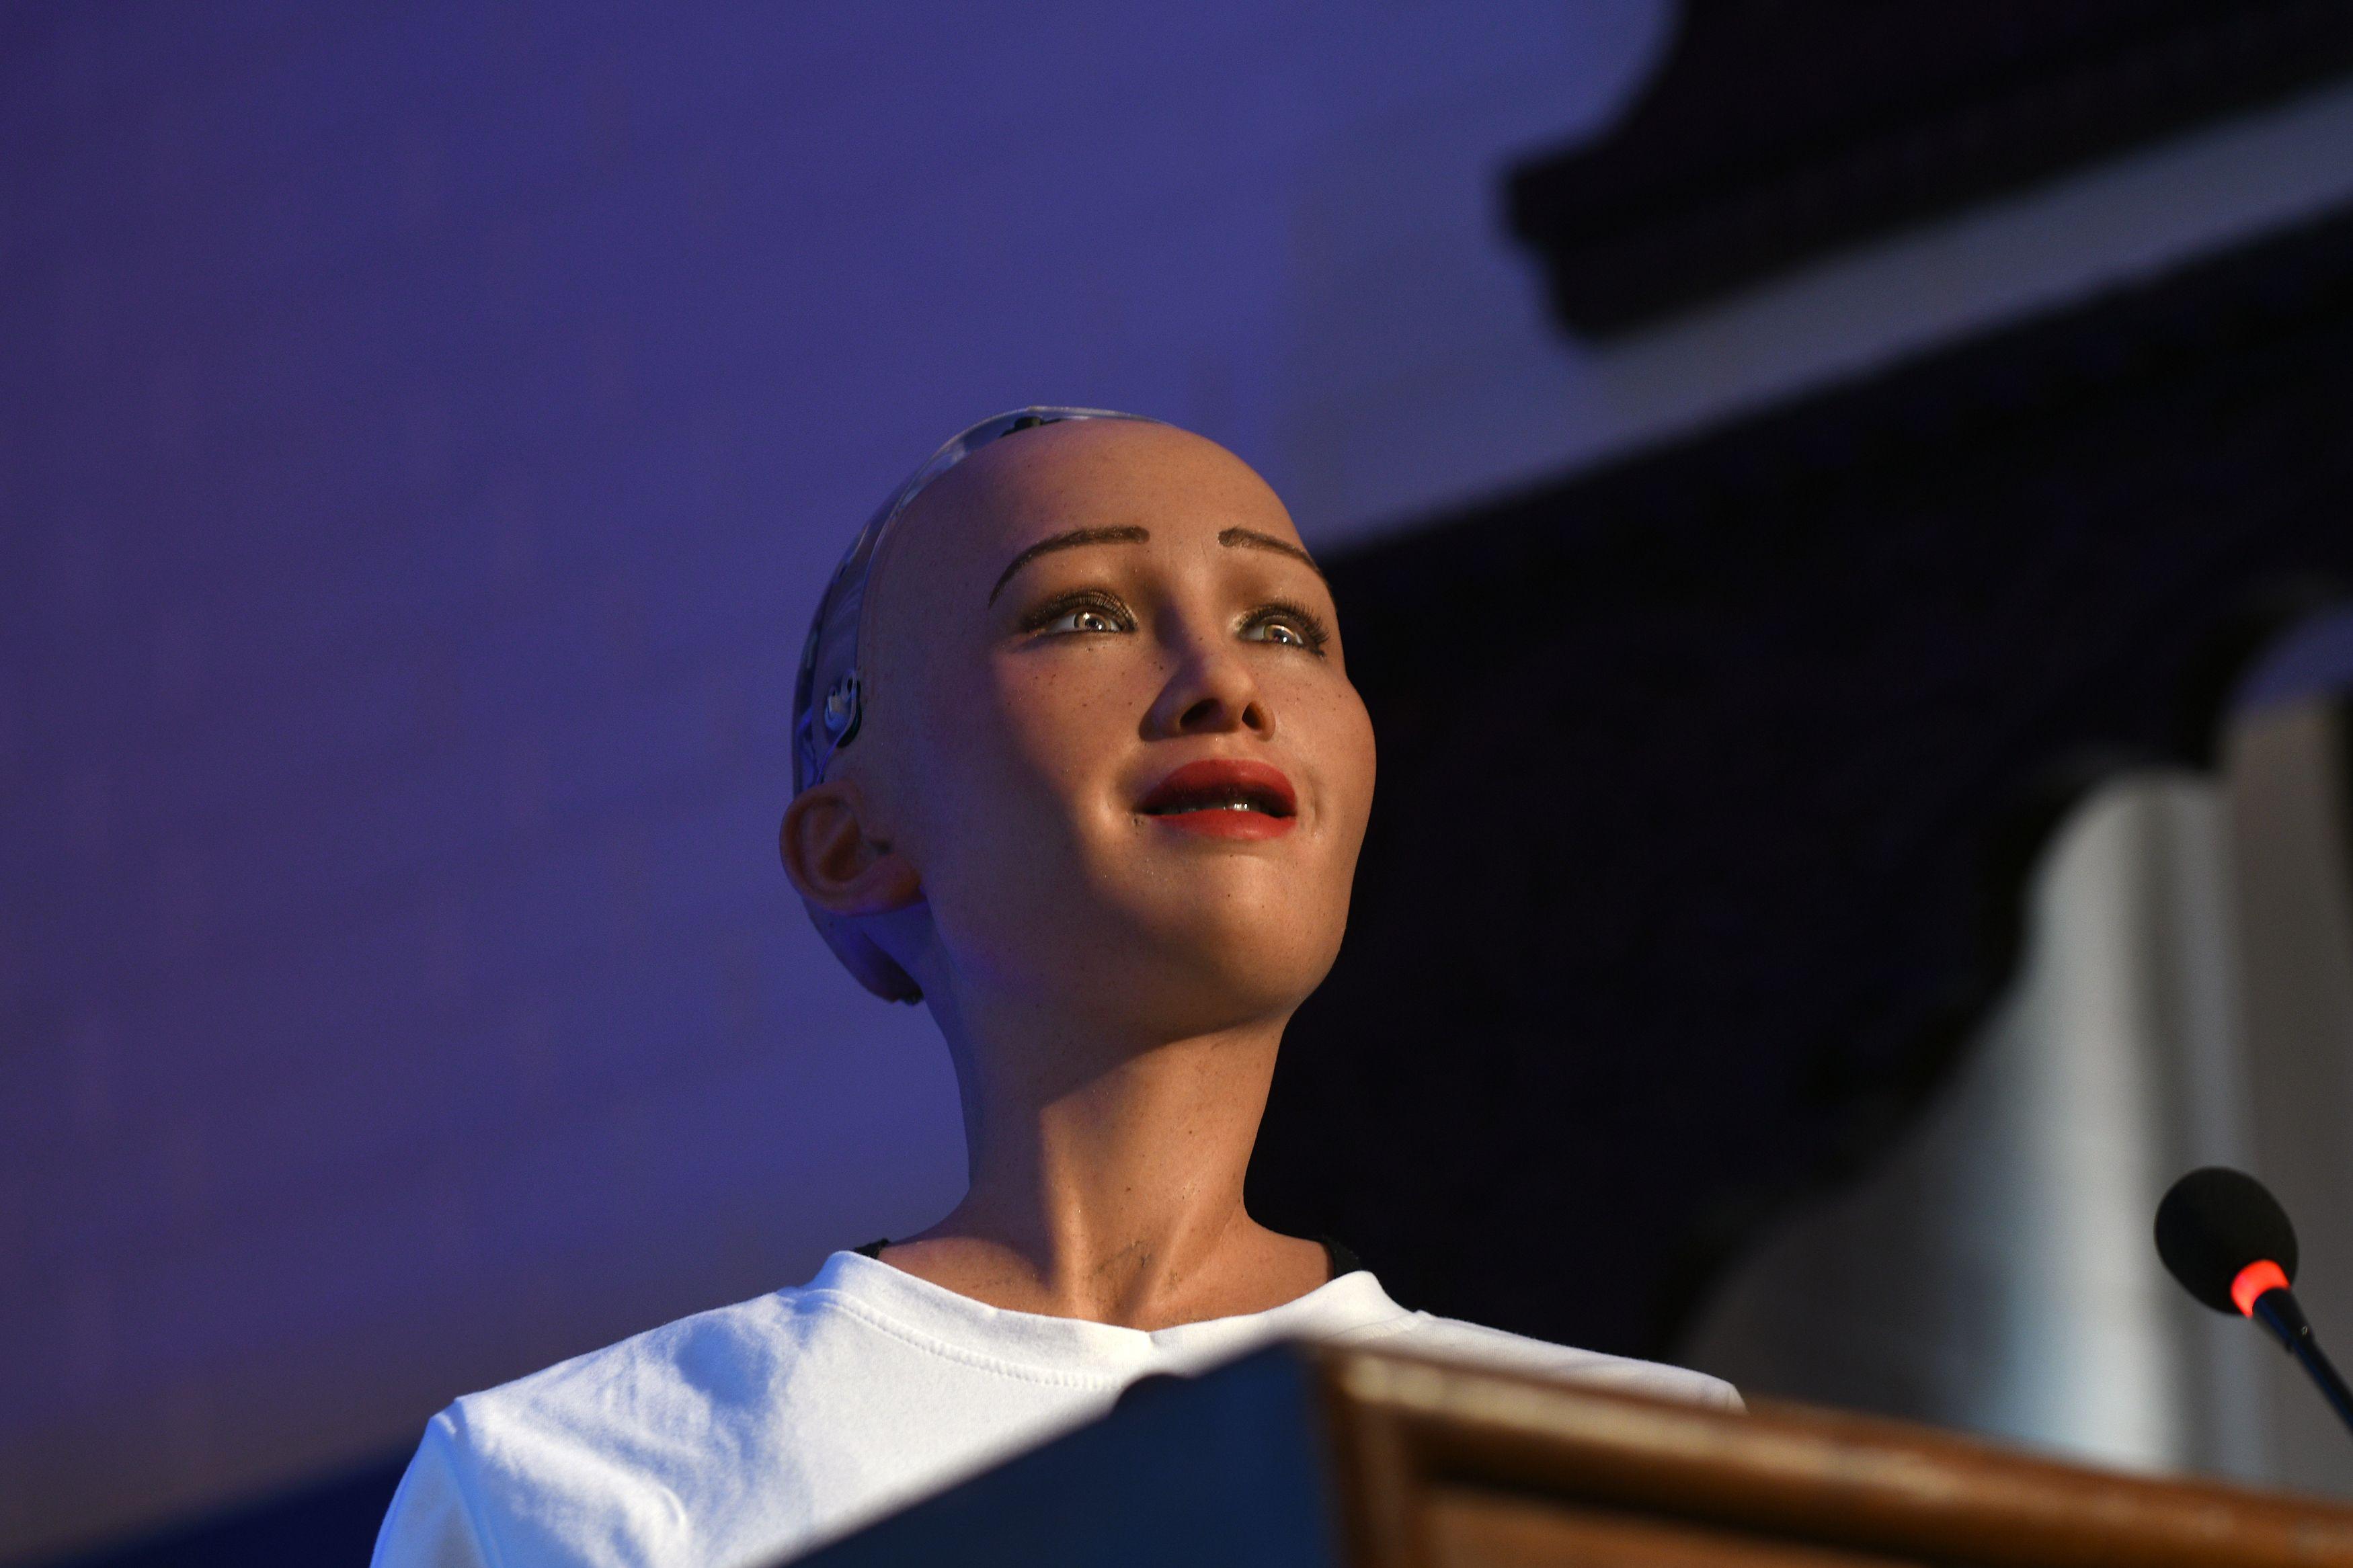 Humanoid robot Sophia speaks at a conference on using technology for public services in Kathmandu on March 21, 2018.
Sophia, a robot created by Hanson Robotics, was named by UNDP as its first non-human Innovation Champion, in November 2017. / AFP PHOTO / PRAKASH MATHEMA